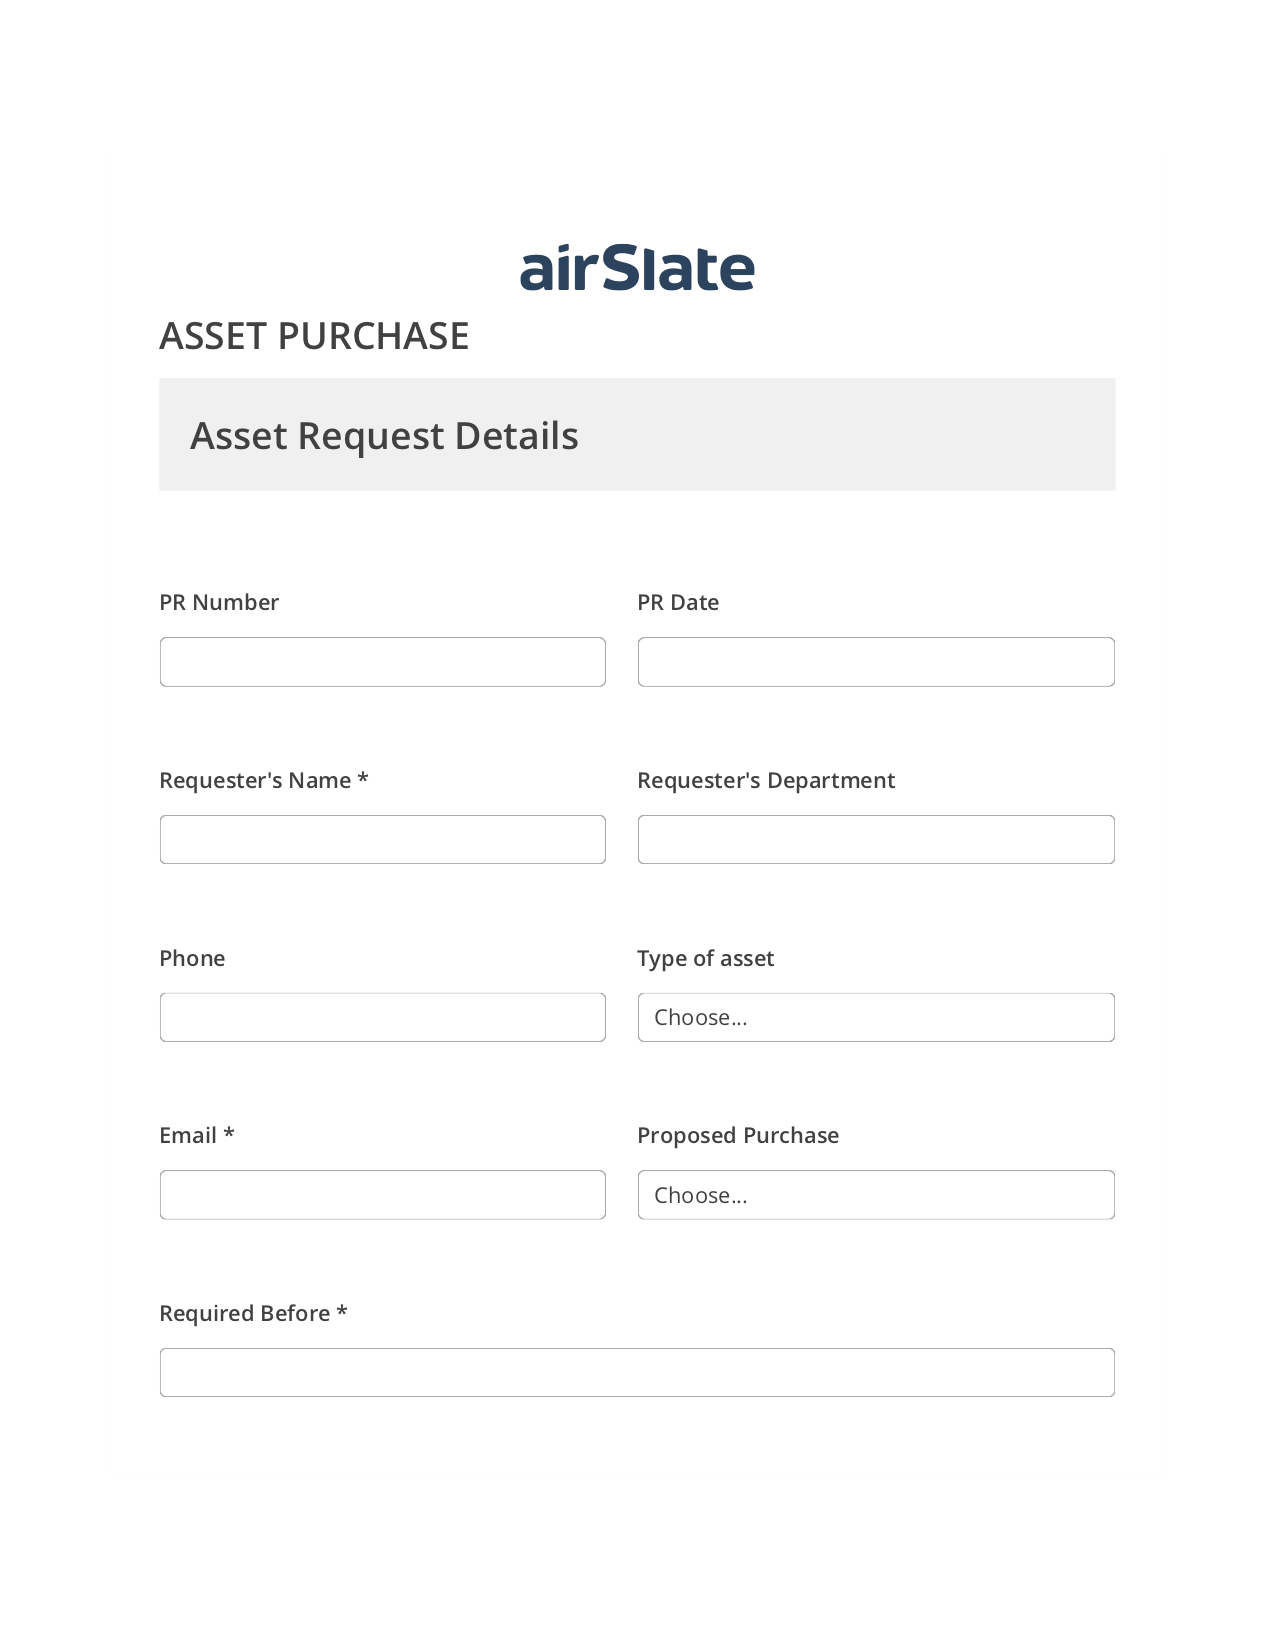 Asset Purchase Workflow Pre-fill Slate from MS Dynamics 365 Records Bot, Set Signature Type Bot, Export to NetSuite Record Bot